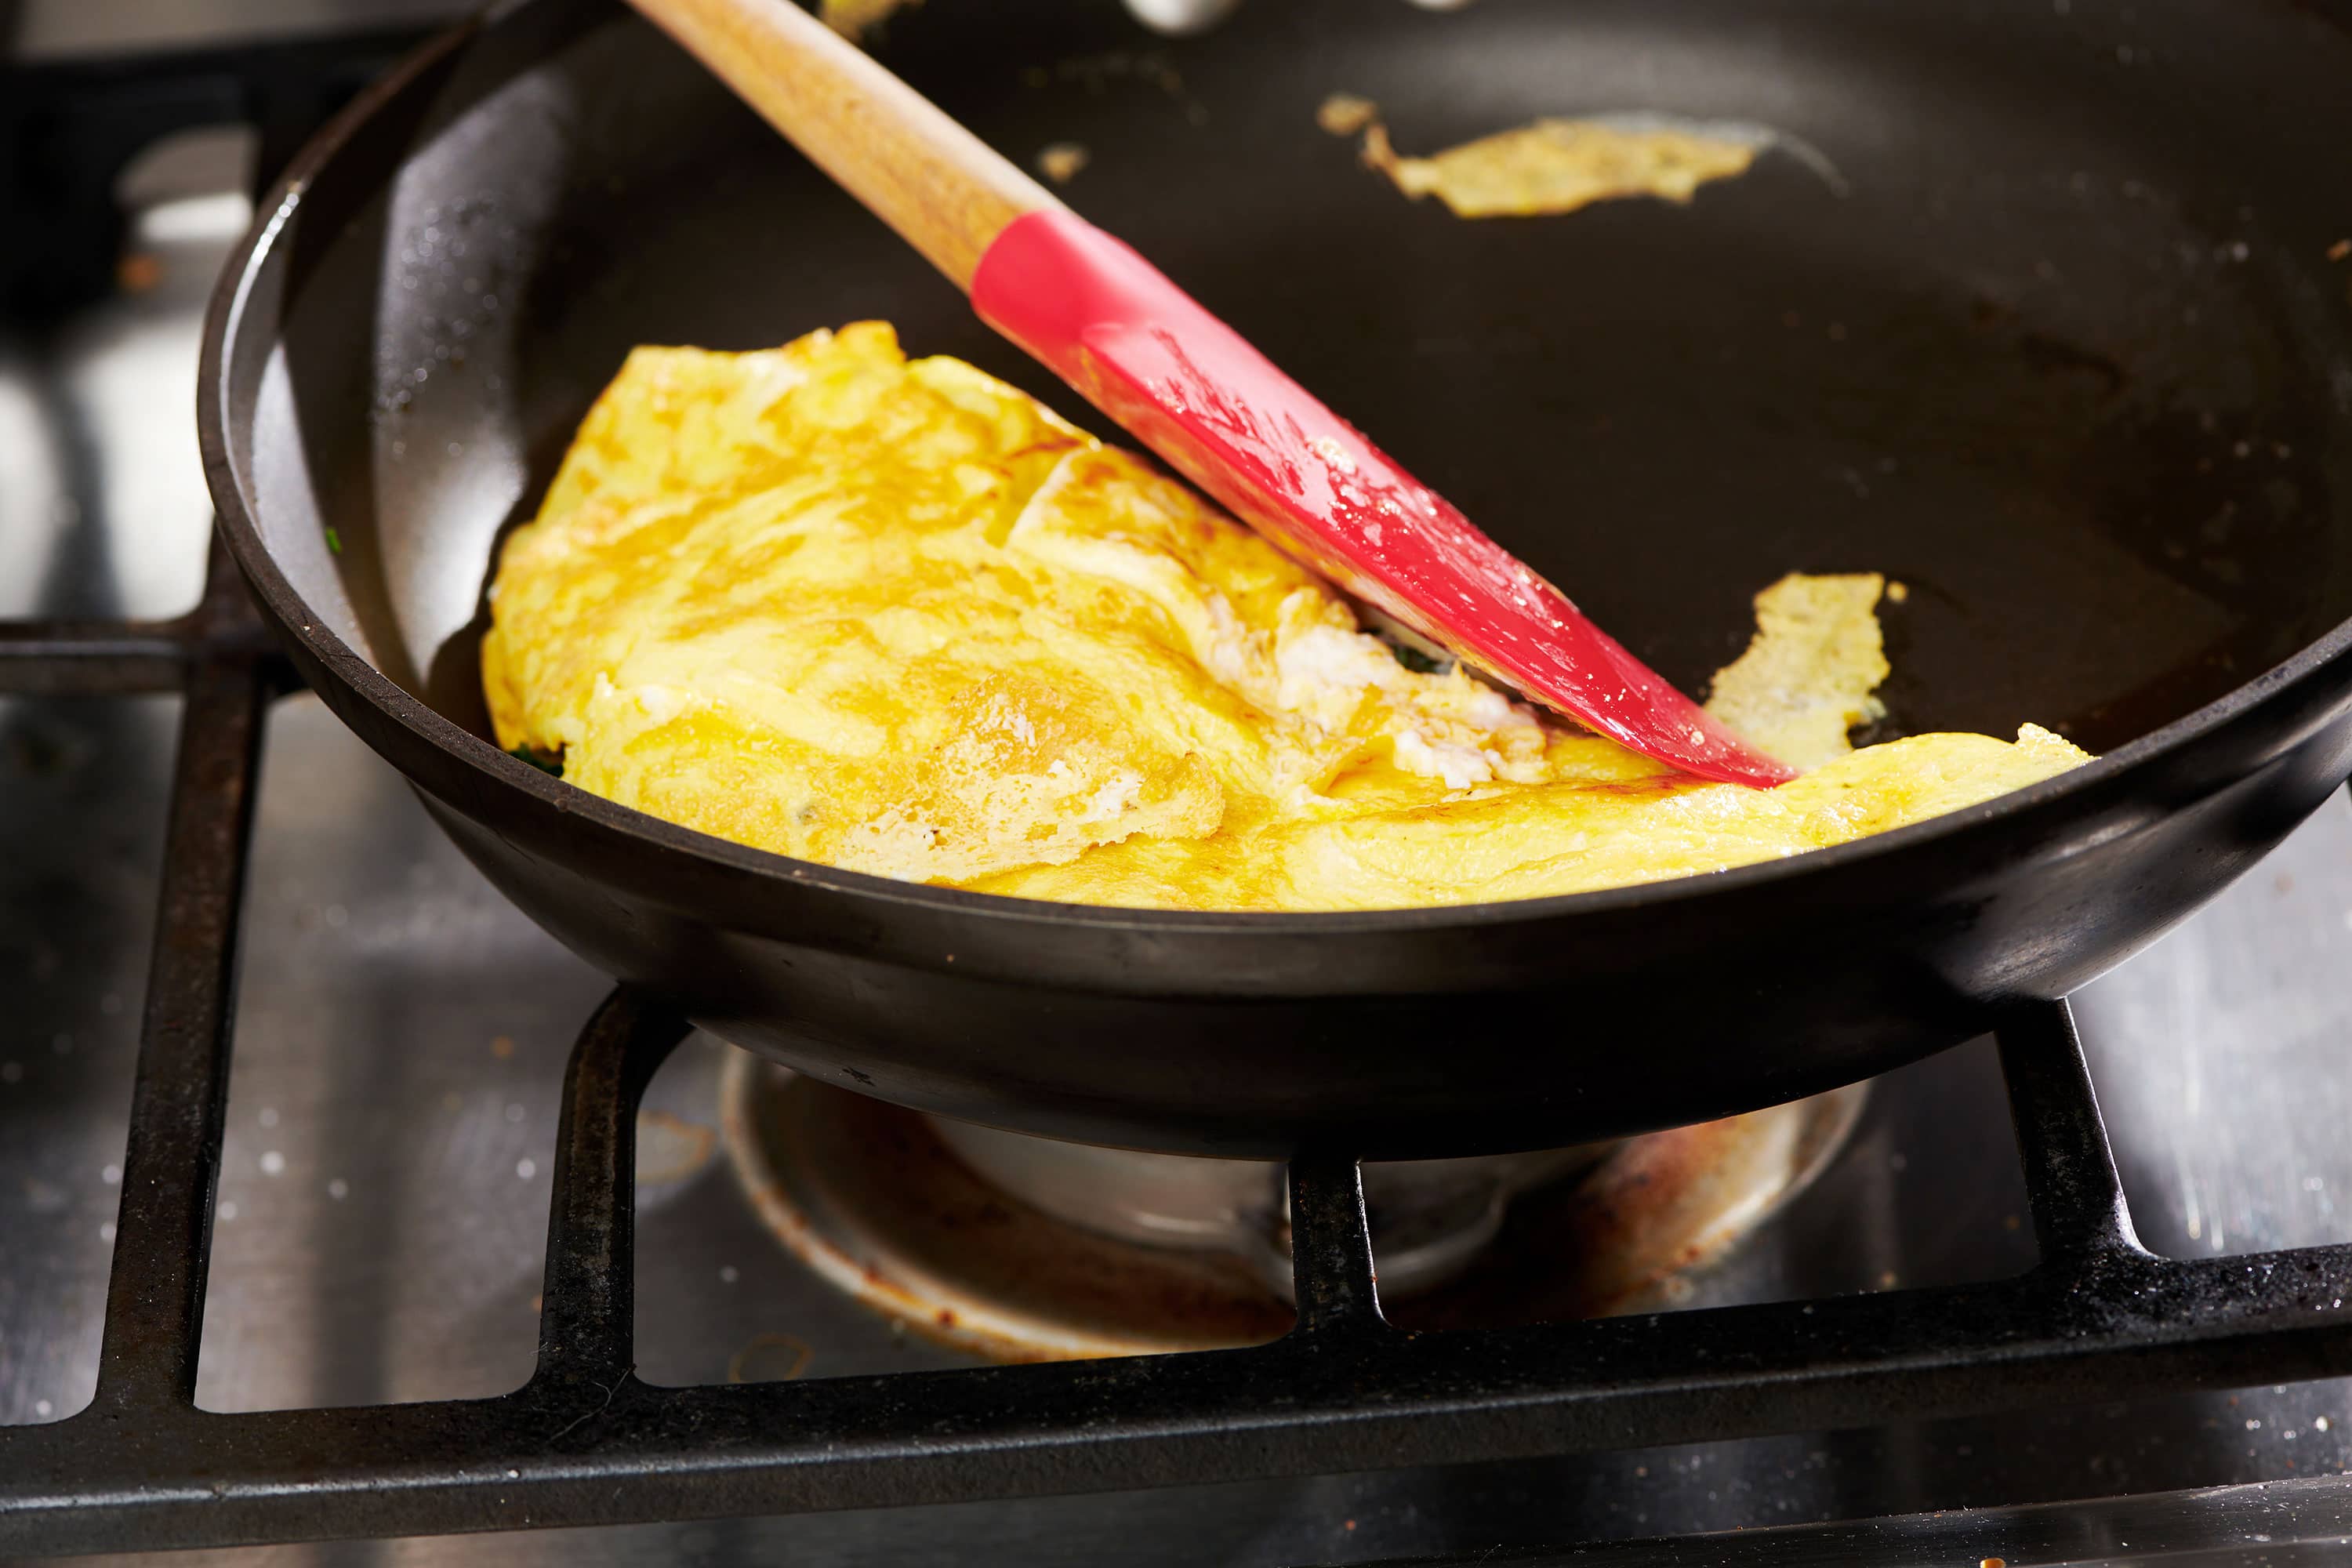 Folding omelet in pan with red spatula.